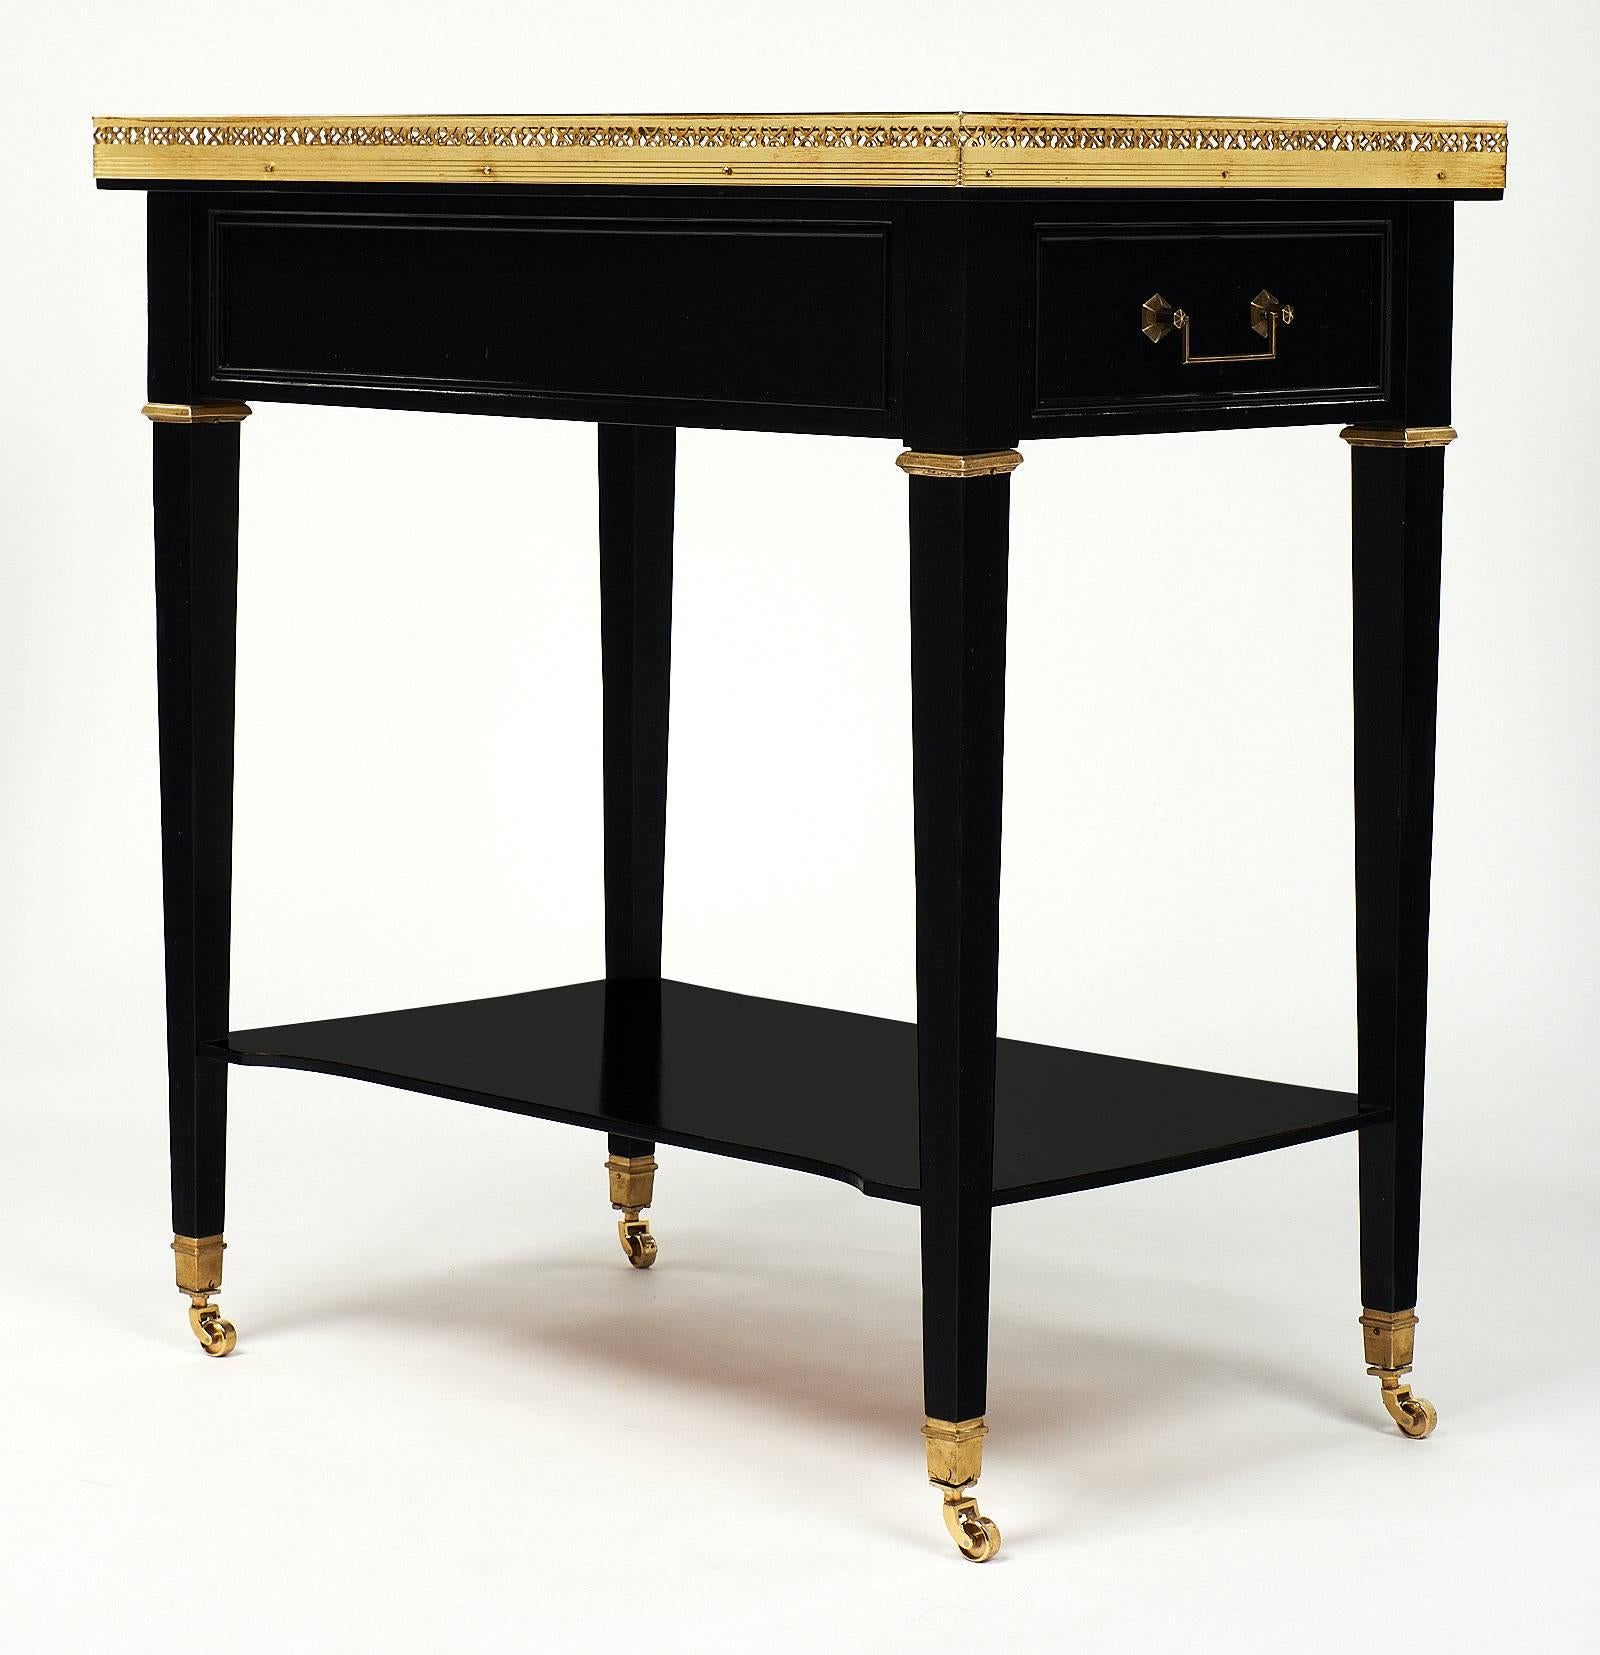 Excellent Louis XVI style rafraichissoir featuring brass champagne buckets and a marble surface for functionality as a bar while entertaining! This piece is made of mahogany that has been ebonized and finished with a French polish for luster. It is